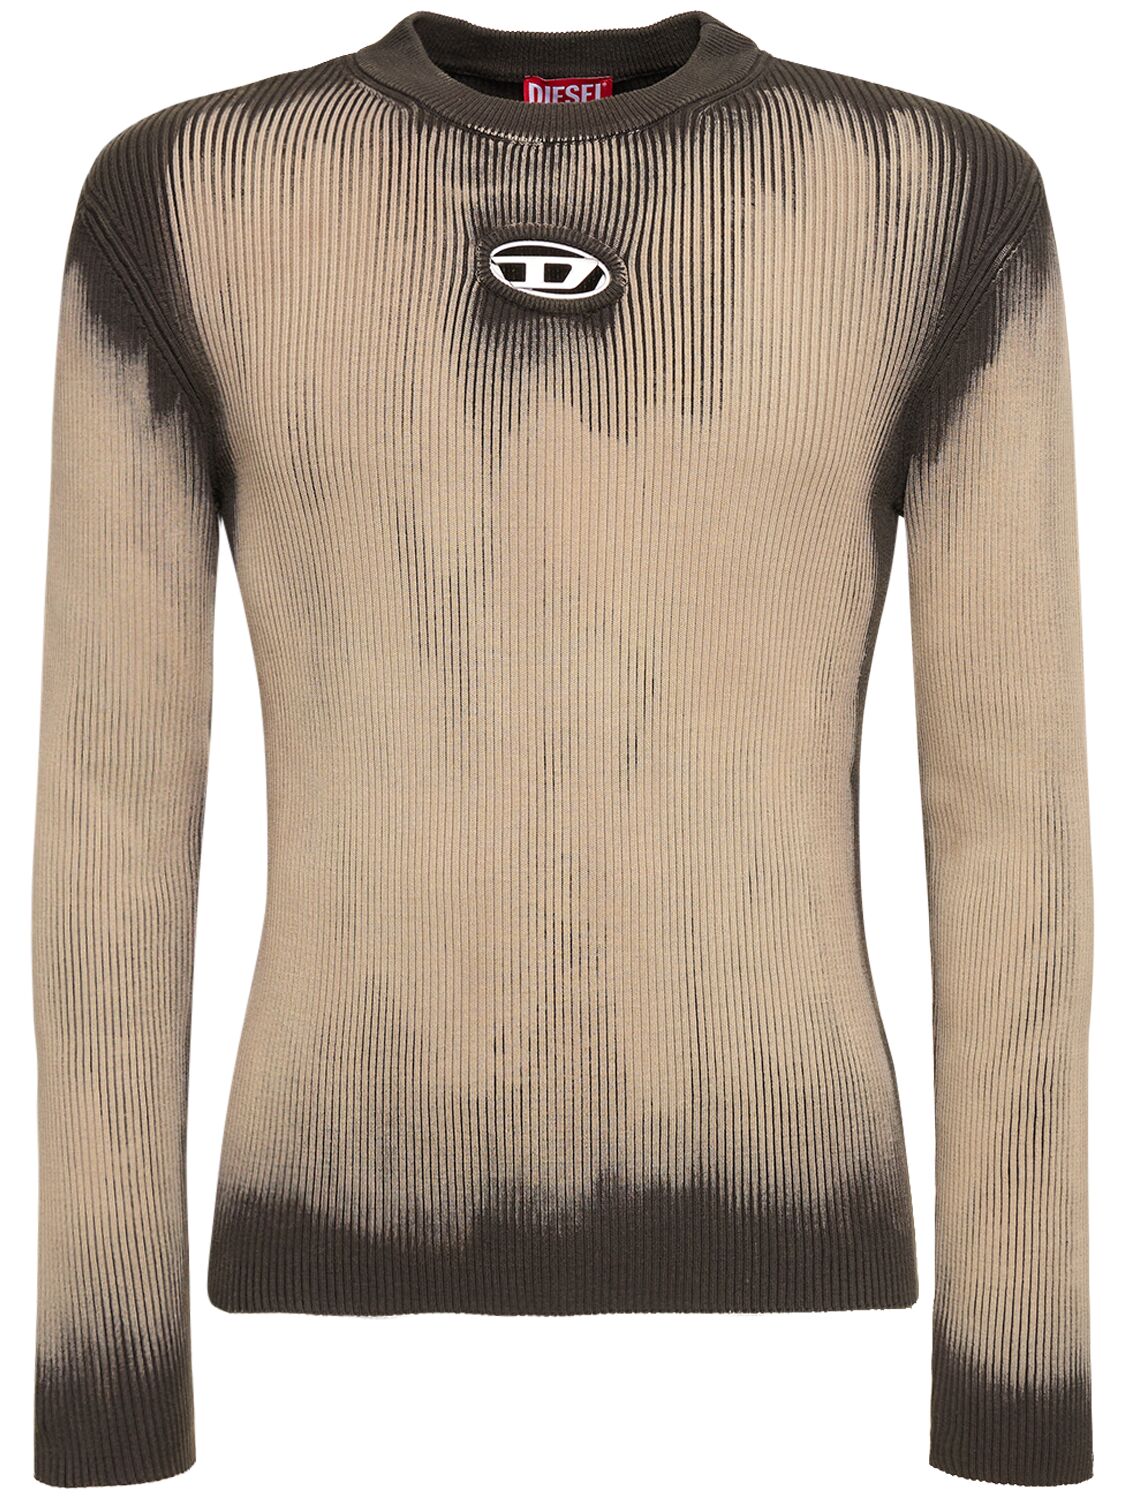 Image of Oval-d Slim Cotton Blend Knit Sweater